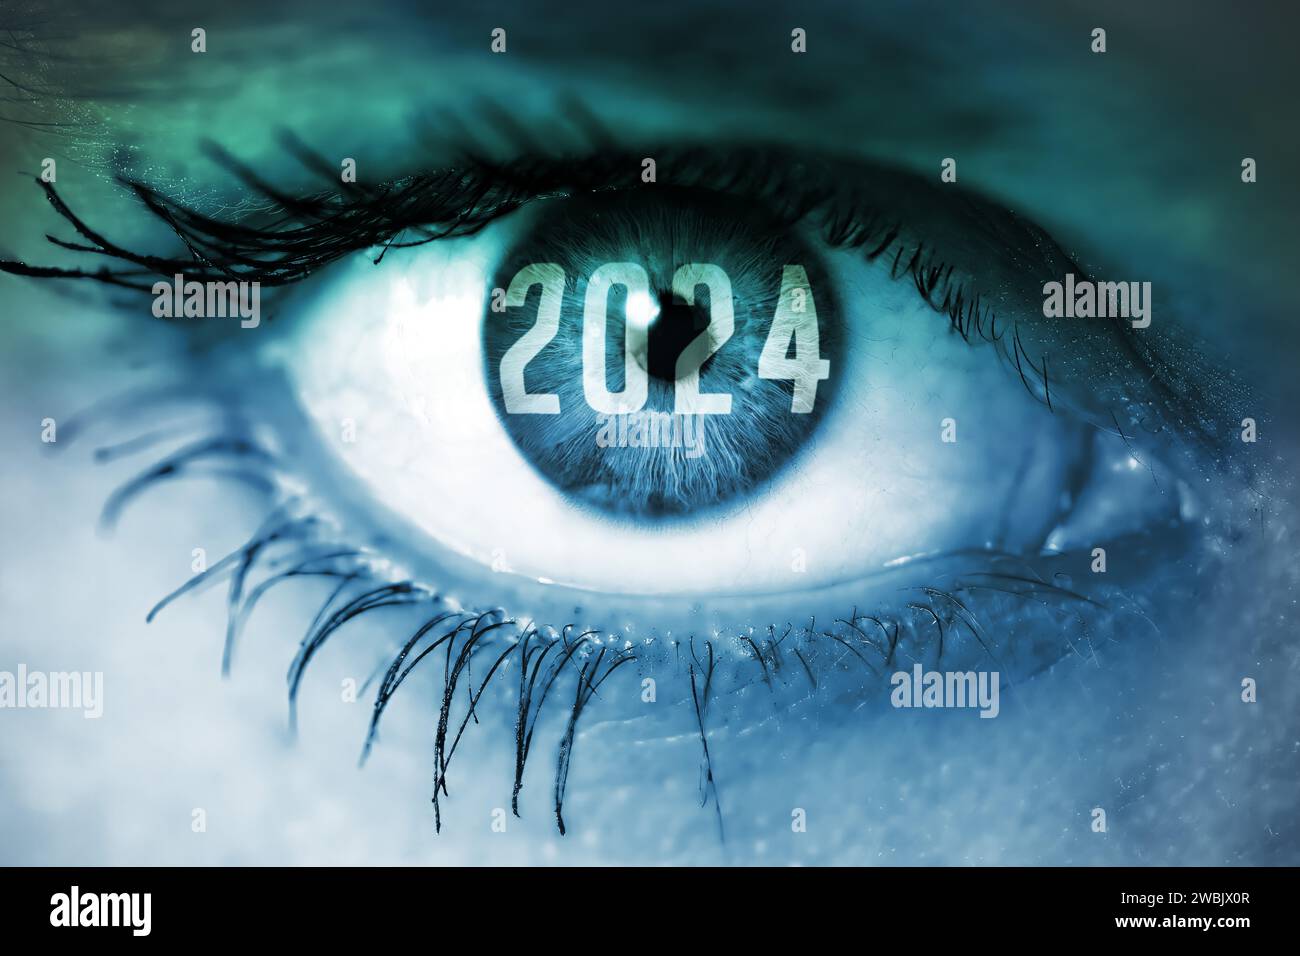 The Year 2024 In A Female Eye, Symbol Photo For The Year 2024 And Its Challenges, Photomontage Stock Photo